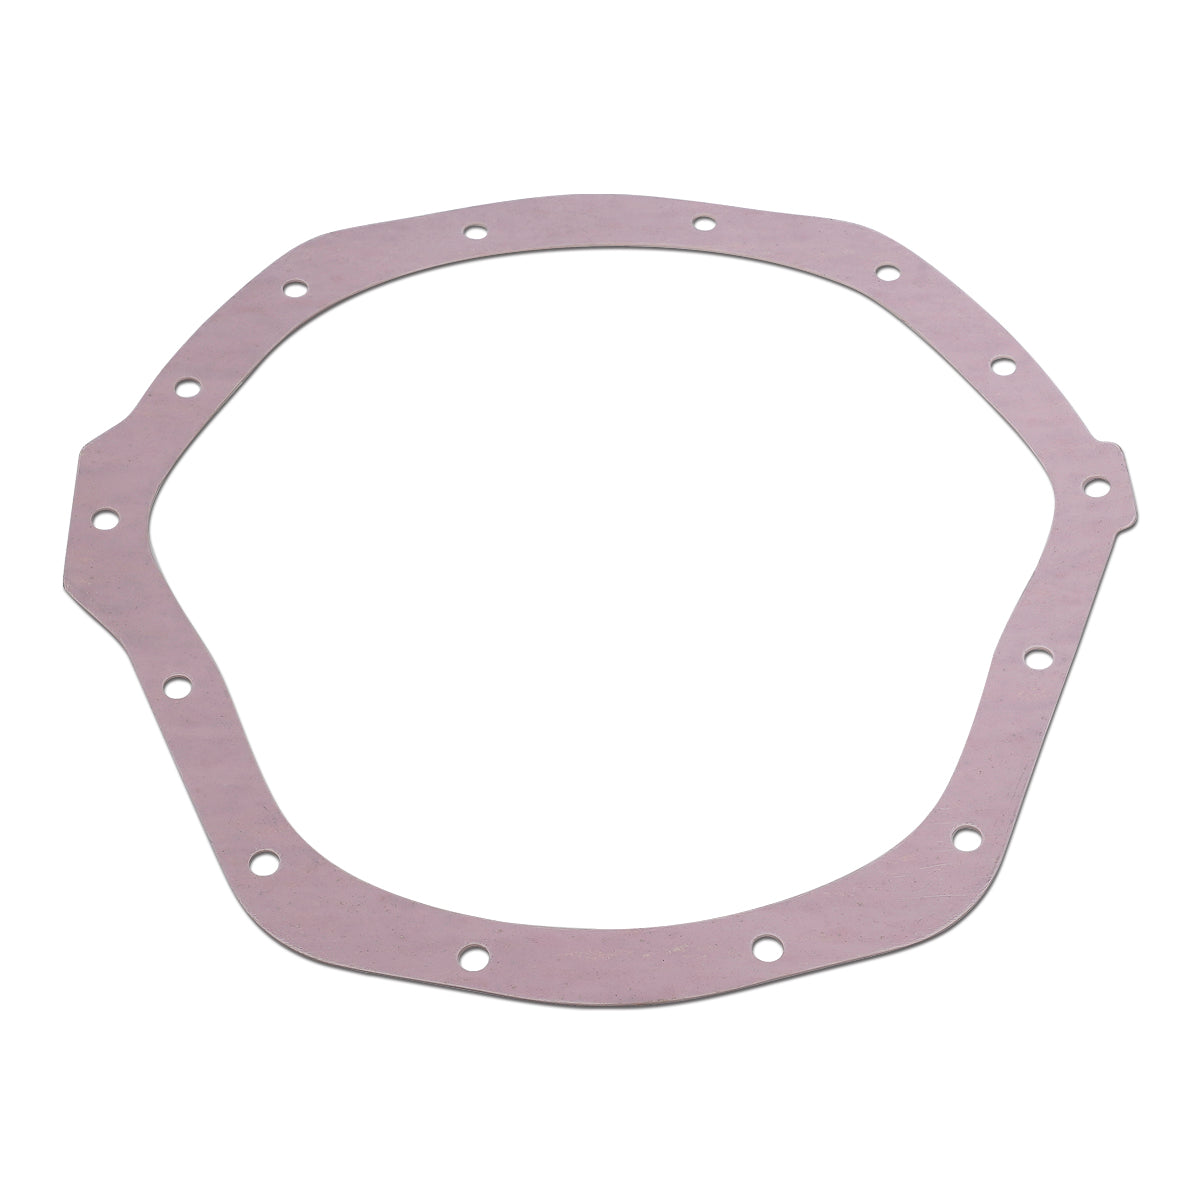 PPE Diesel GM-Dodge Rear Differential Cover Gasket 138051002